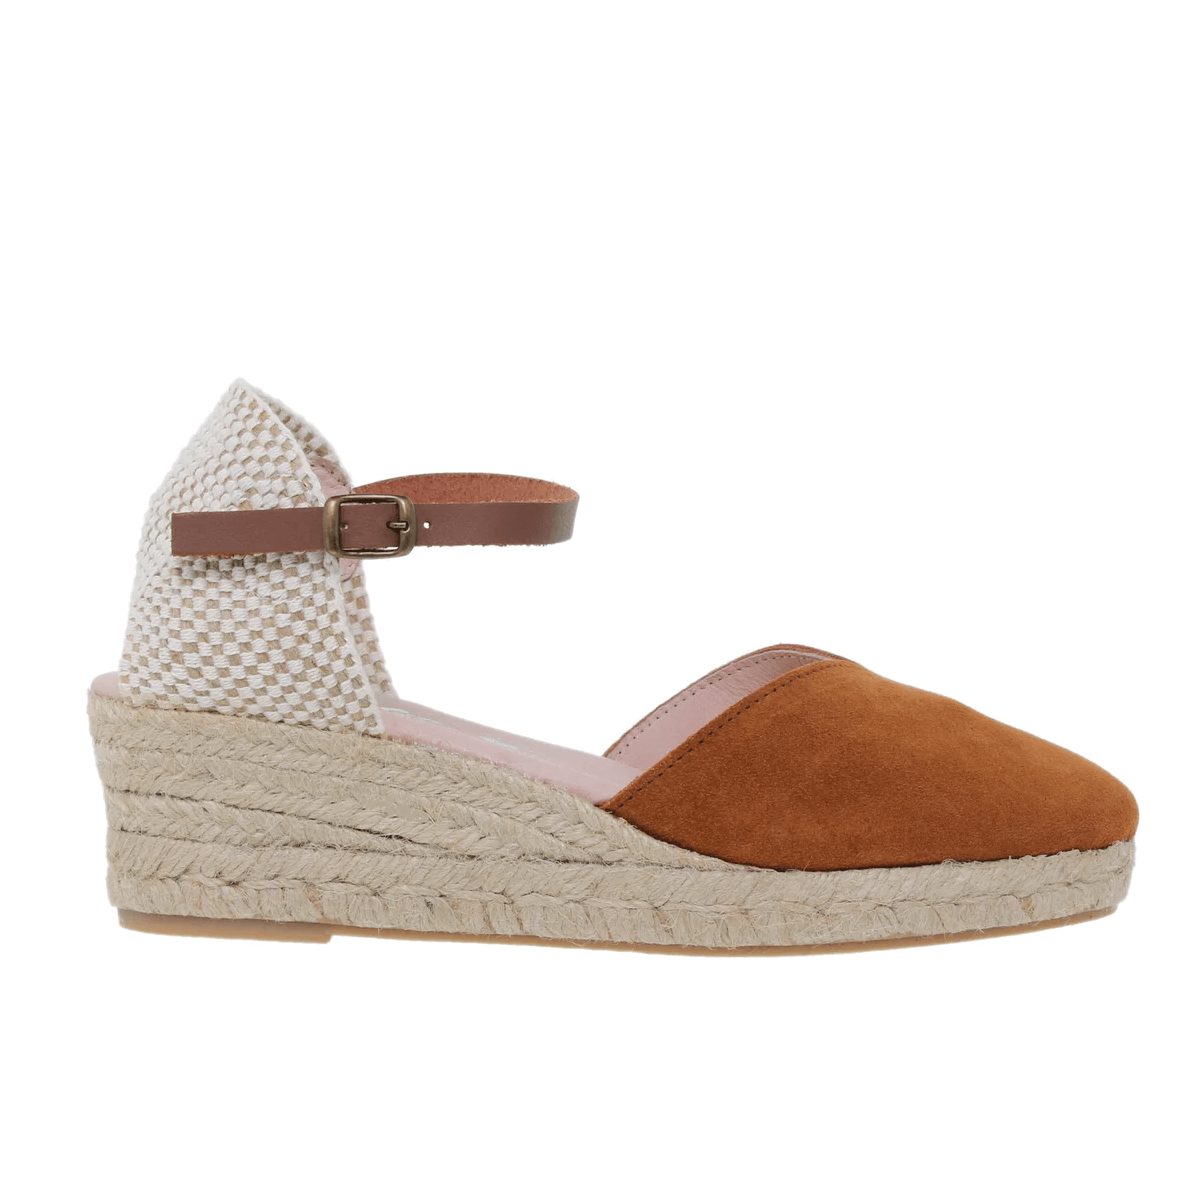 Brown leather espadrilles by Amelie